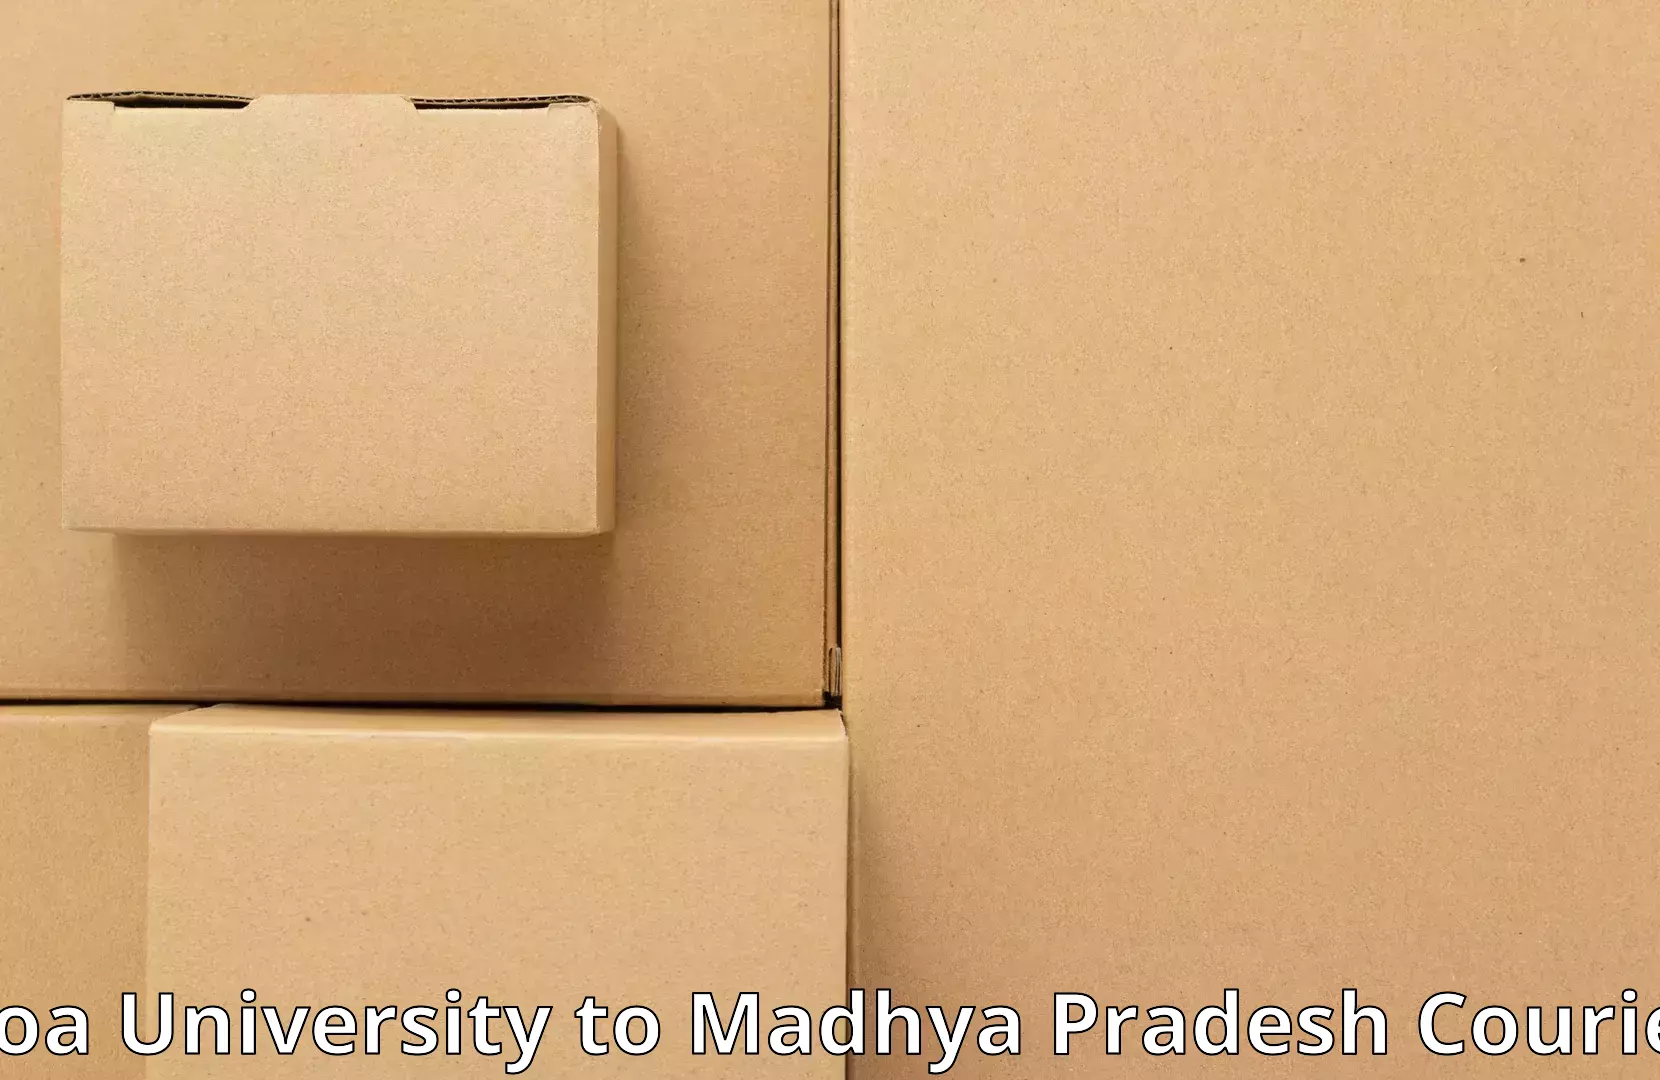 Reliable relocation services in Goa University to IIT Indore